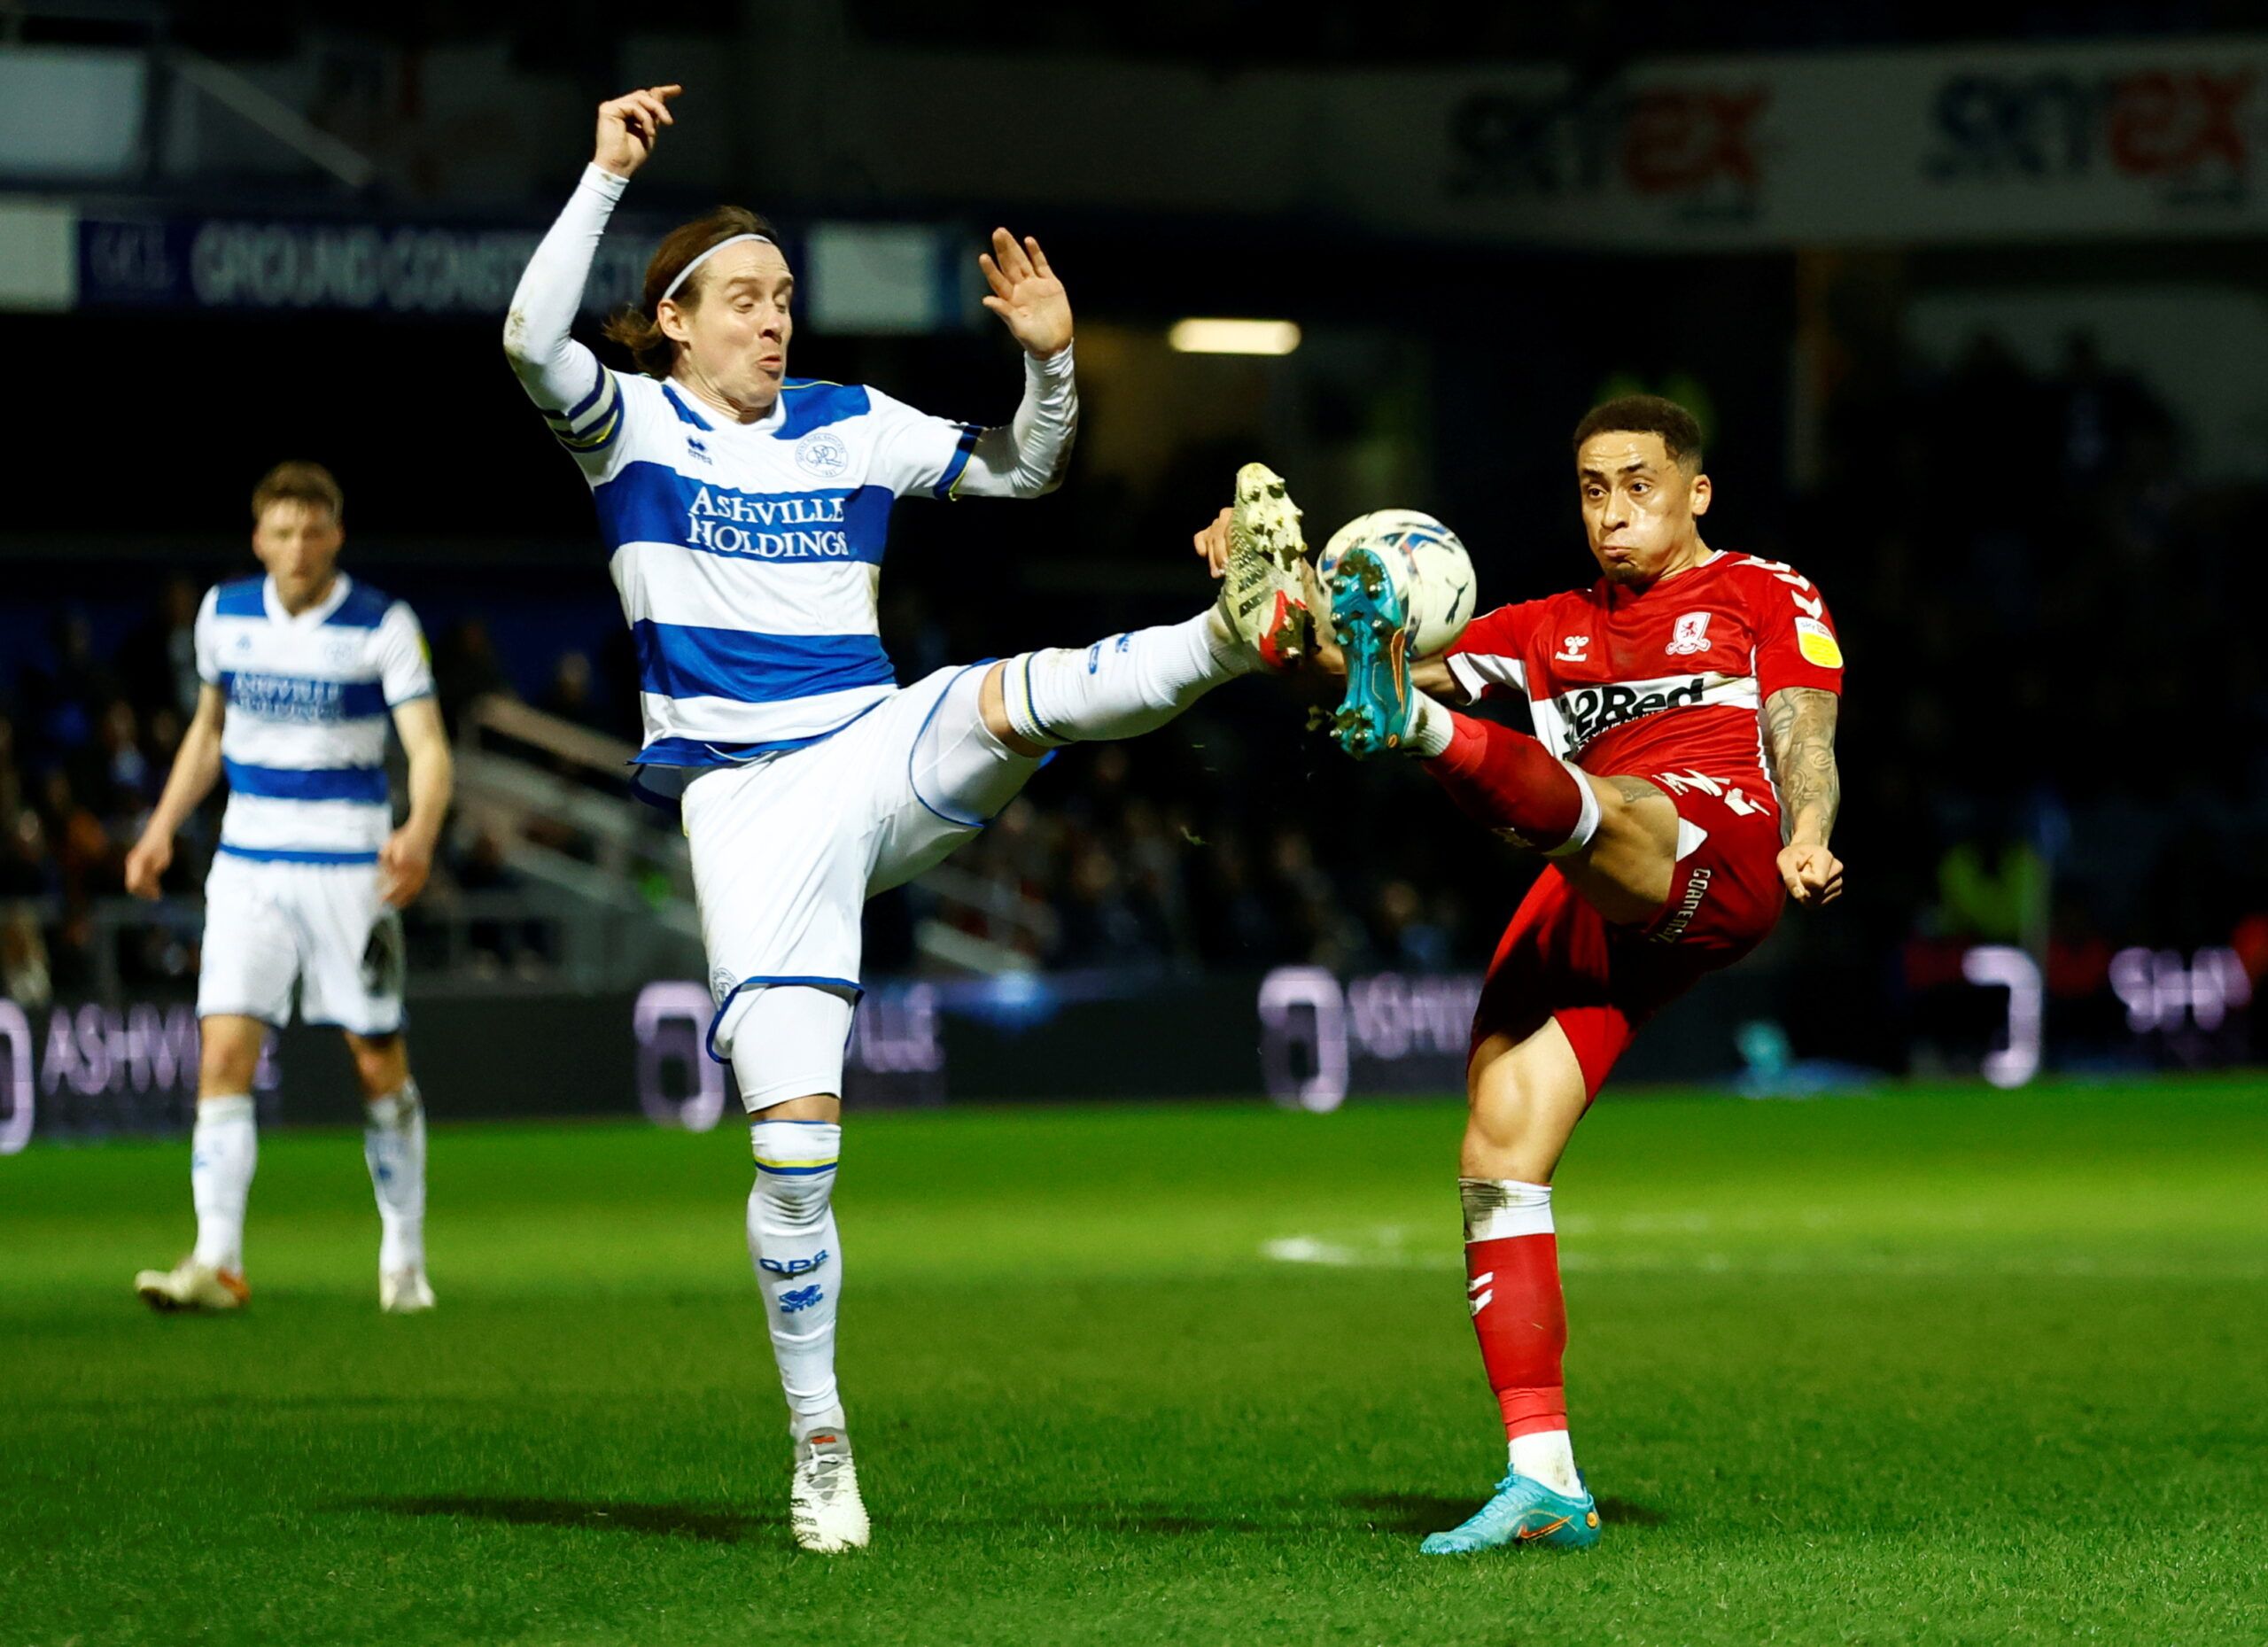 Soccer Football - Championship - Queens Park Rangers v Middlesbrough - Loftus Road, London, Britain - February 9, 2022  Queens Park Rangers' Stefan Johansen in action with Middlesbrough's Matt Crooks   Action Images/Andrew Boyers  EDITORIAL USE ONLY. No use with unauthorized audio, video, data, fixture lists, club/league logos or 